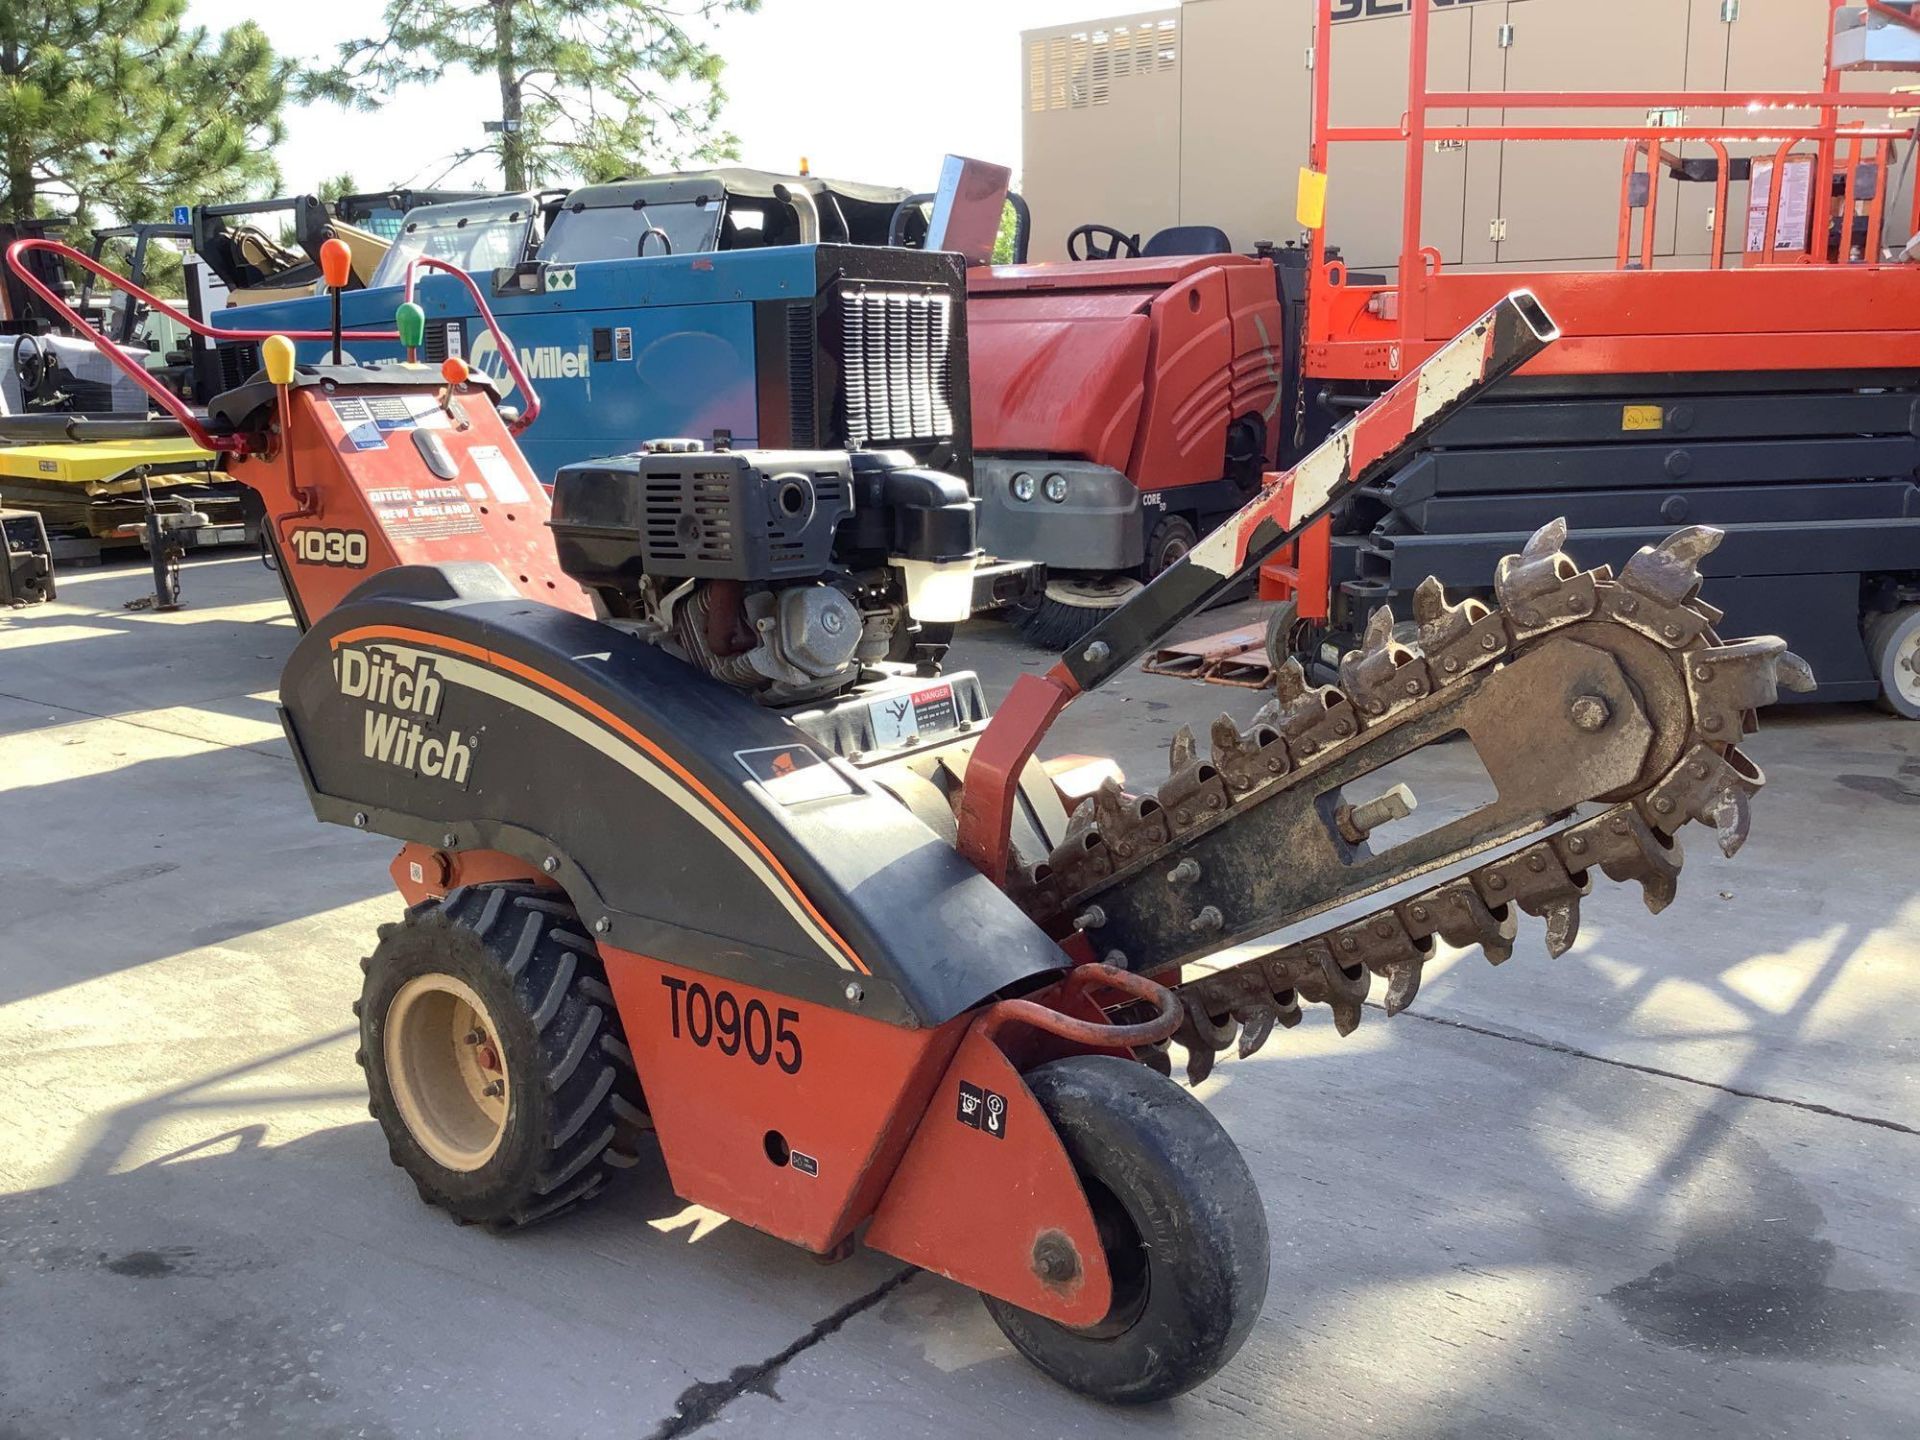 DITCH WITCH WALK BEHIND TRENCHER MODEL 1030, GAS POWERED, RUNS & OPERATES - Image 9 of 11